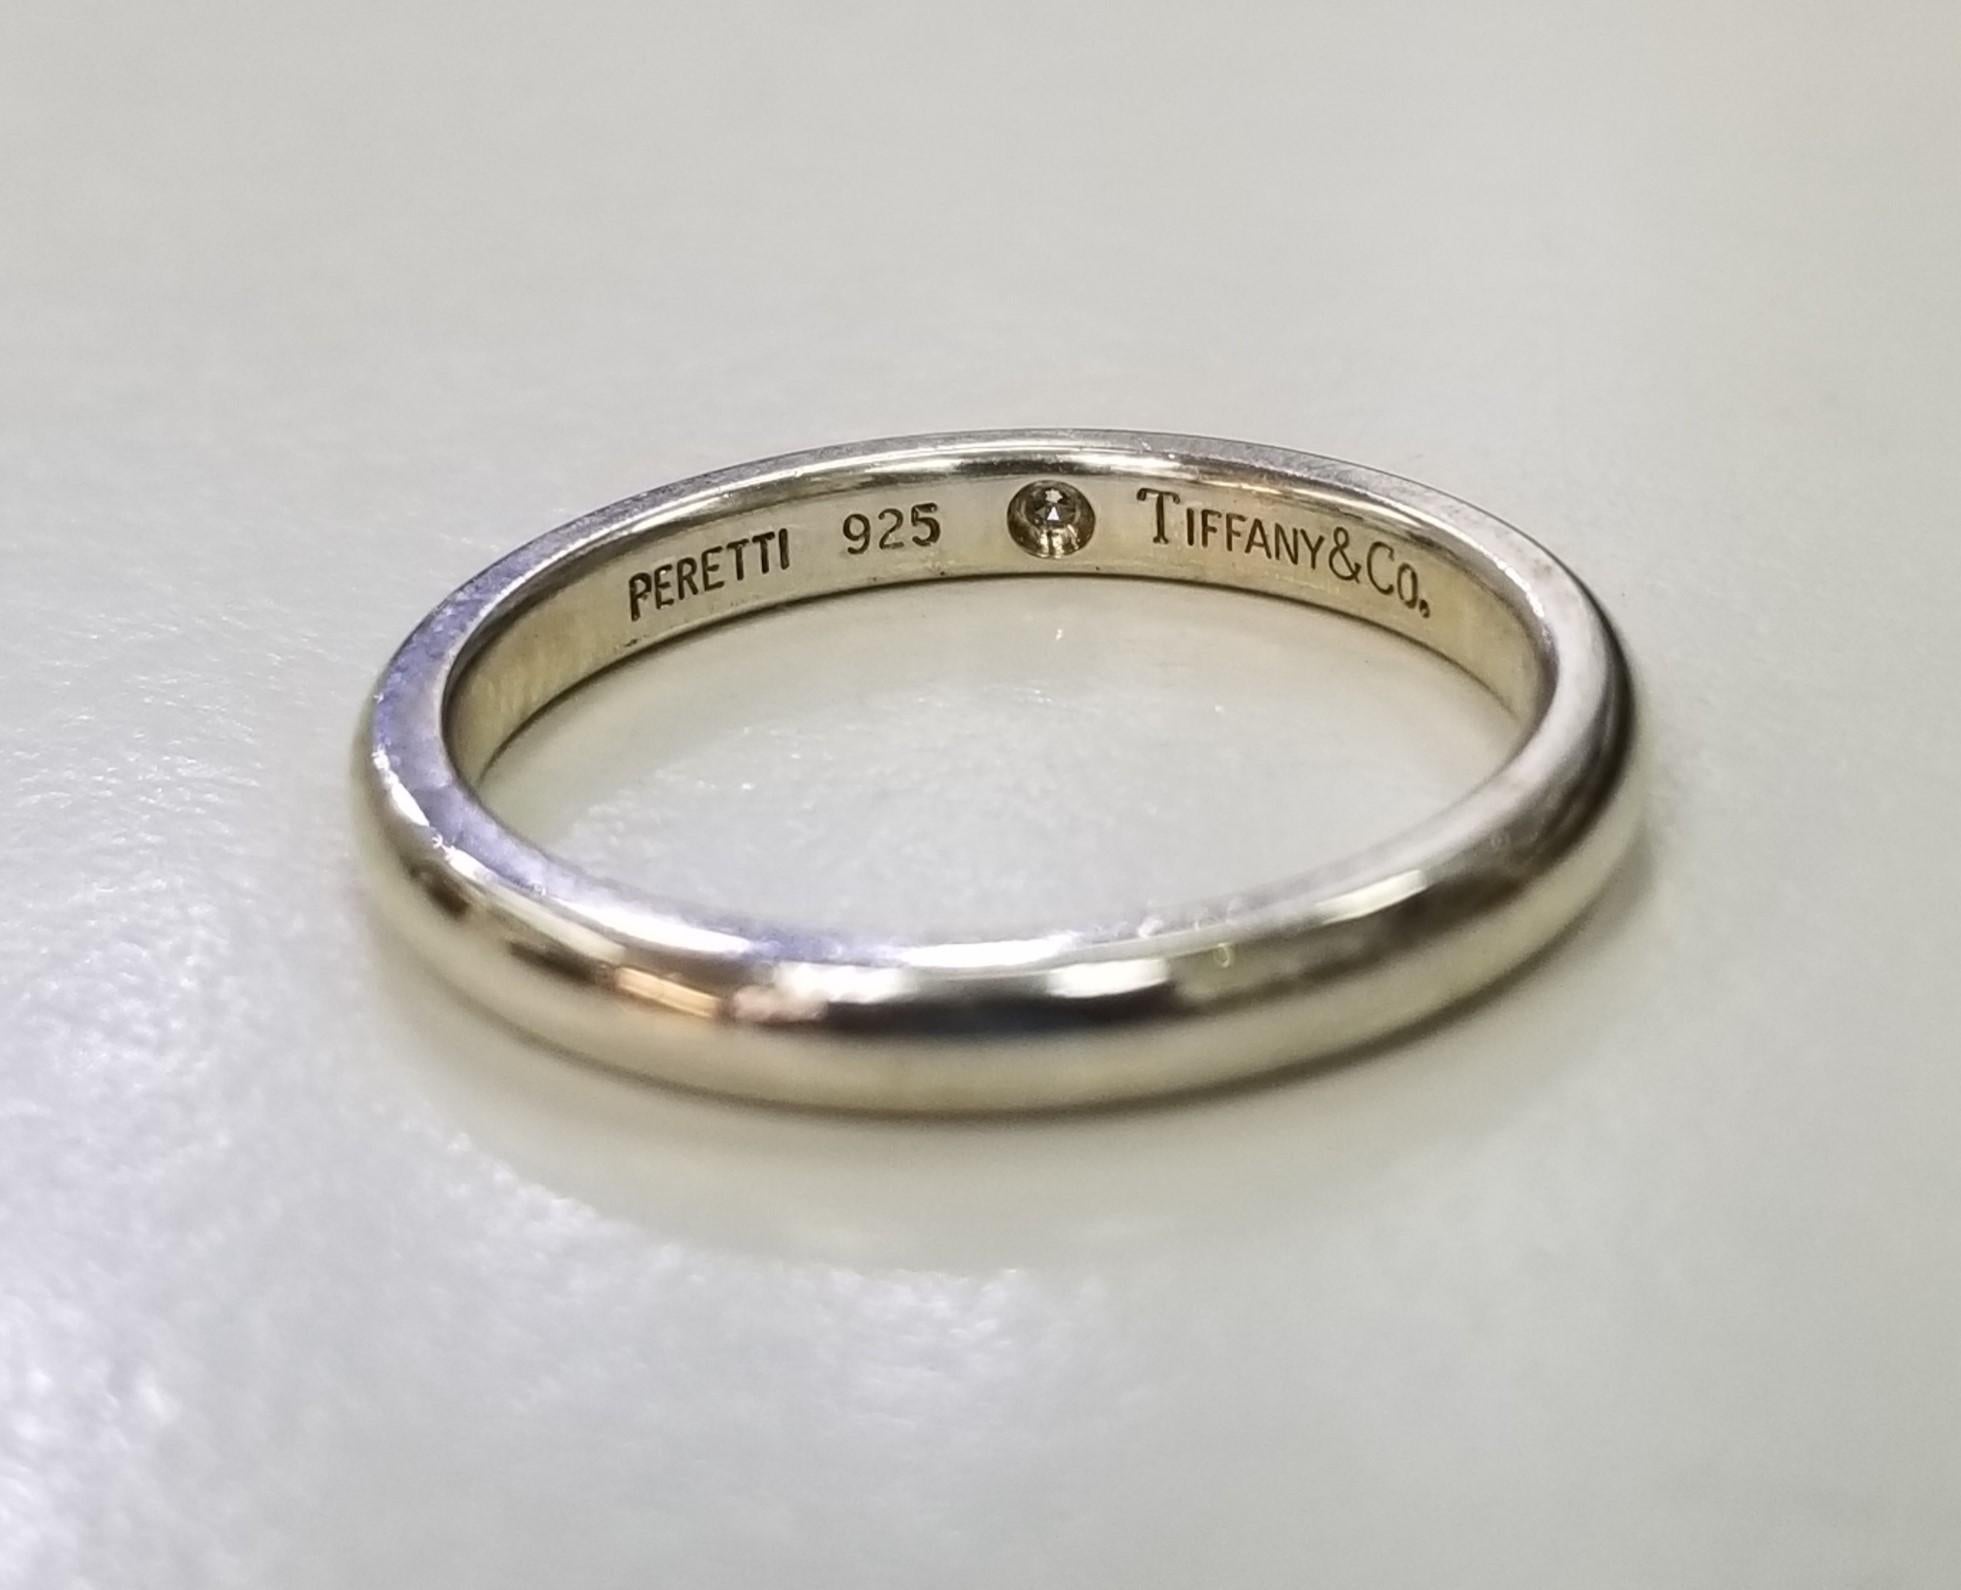 Tiffany & Co. Elsa Perritti Sterling Silver Diamond Ring In Excellent Condition For Sale In Los Angeles, CA